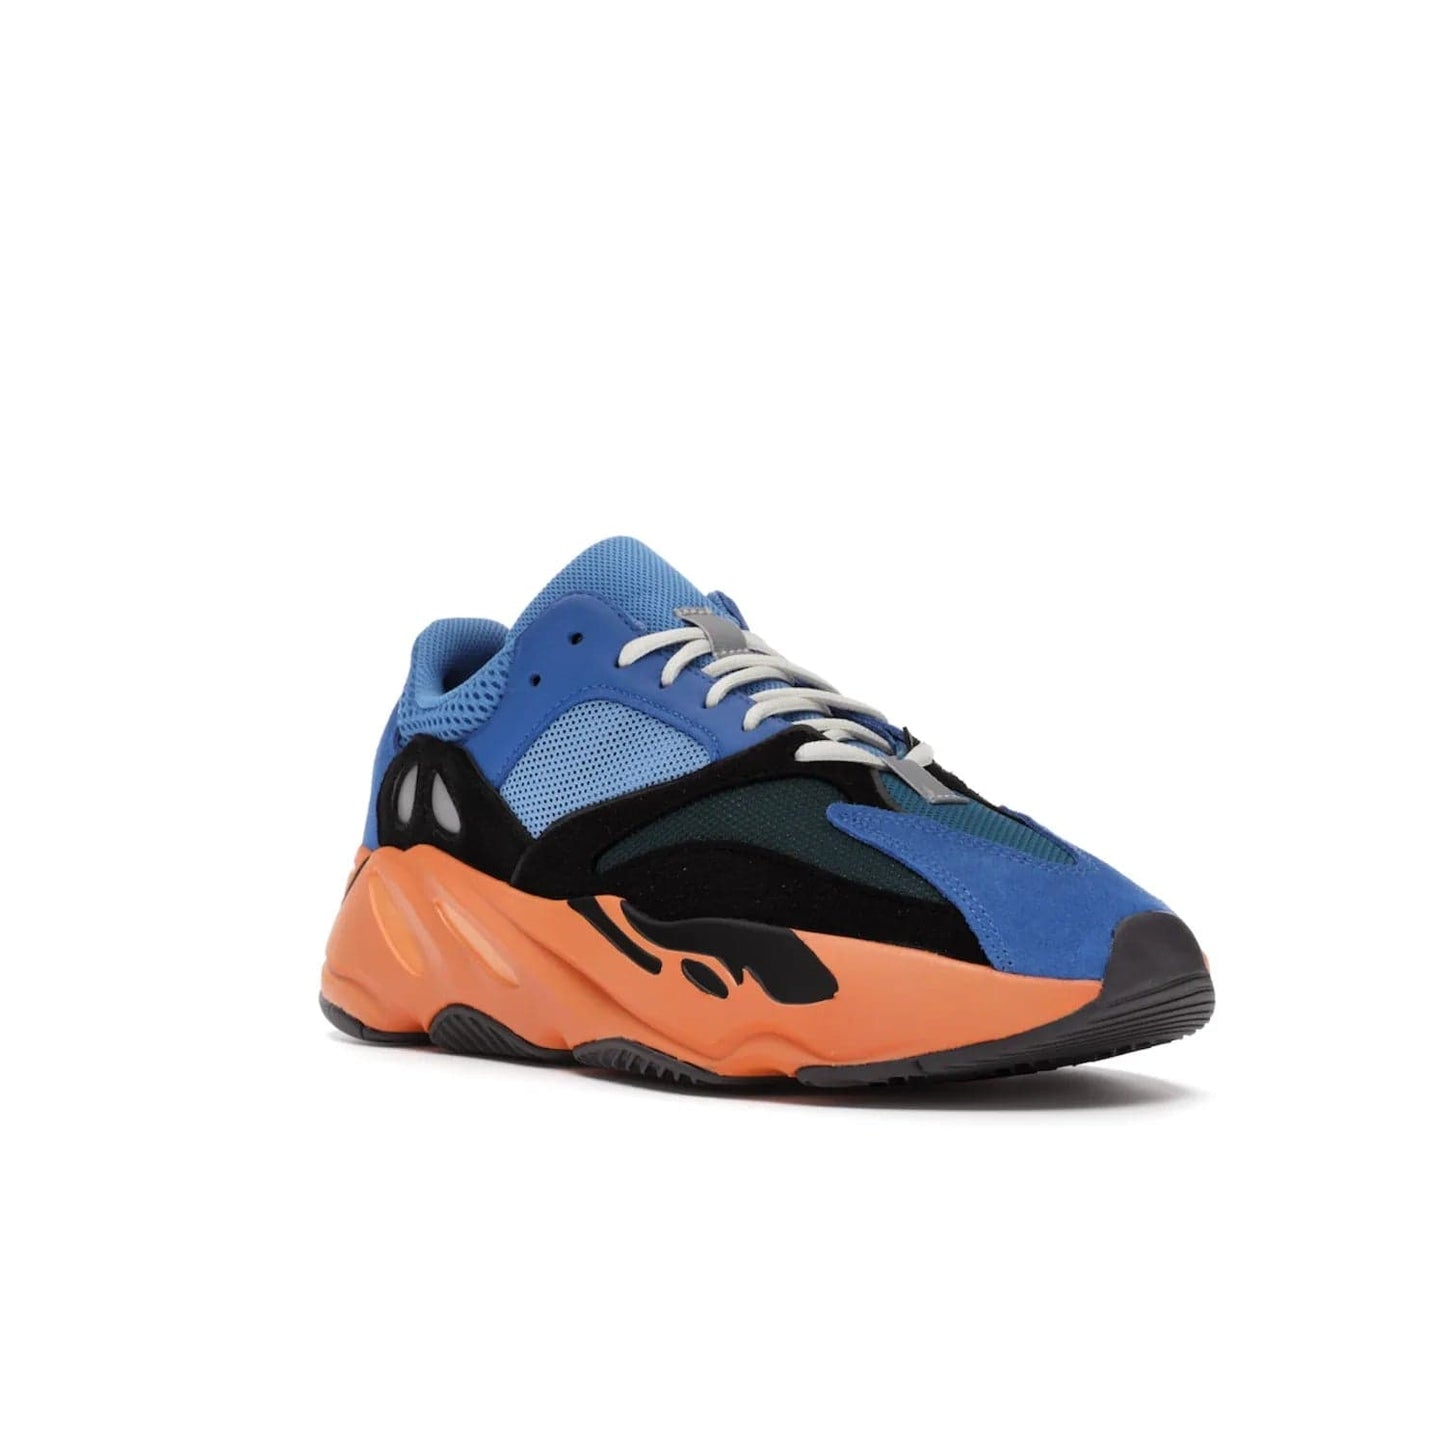 adidas Yeezy Boost 700 Bright Blue - Image 6 - Only at www.BallersClubKickz.com - Iconic sneaker style meets vibrant colour with the adidas Yeezy Boost 700 Bright Blue. Reflective accents, turquoise and teal panels, bright orange midsole and black outsole make for a bold release. April 2021.